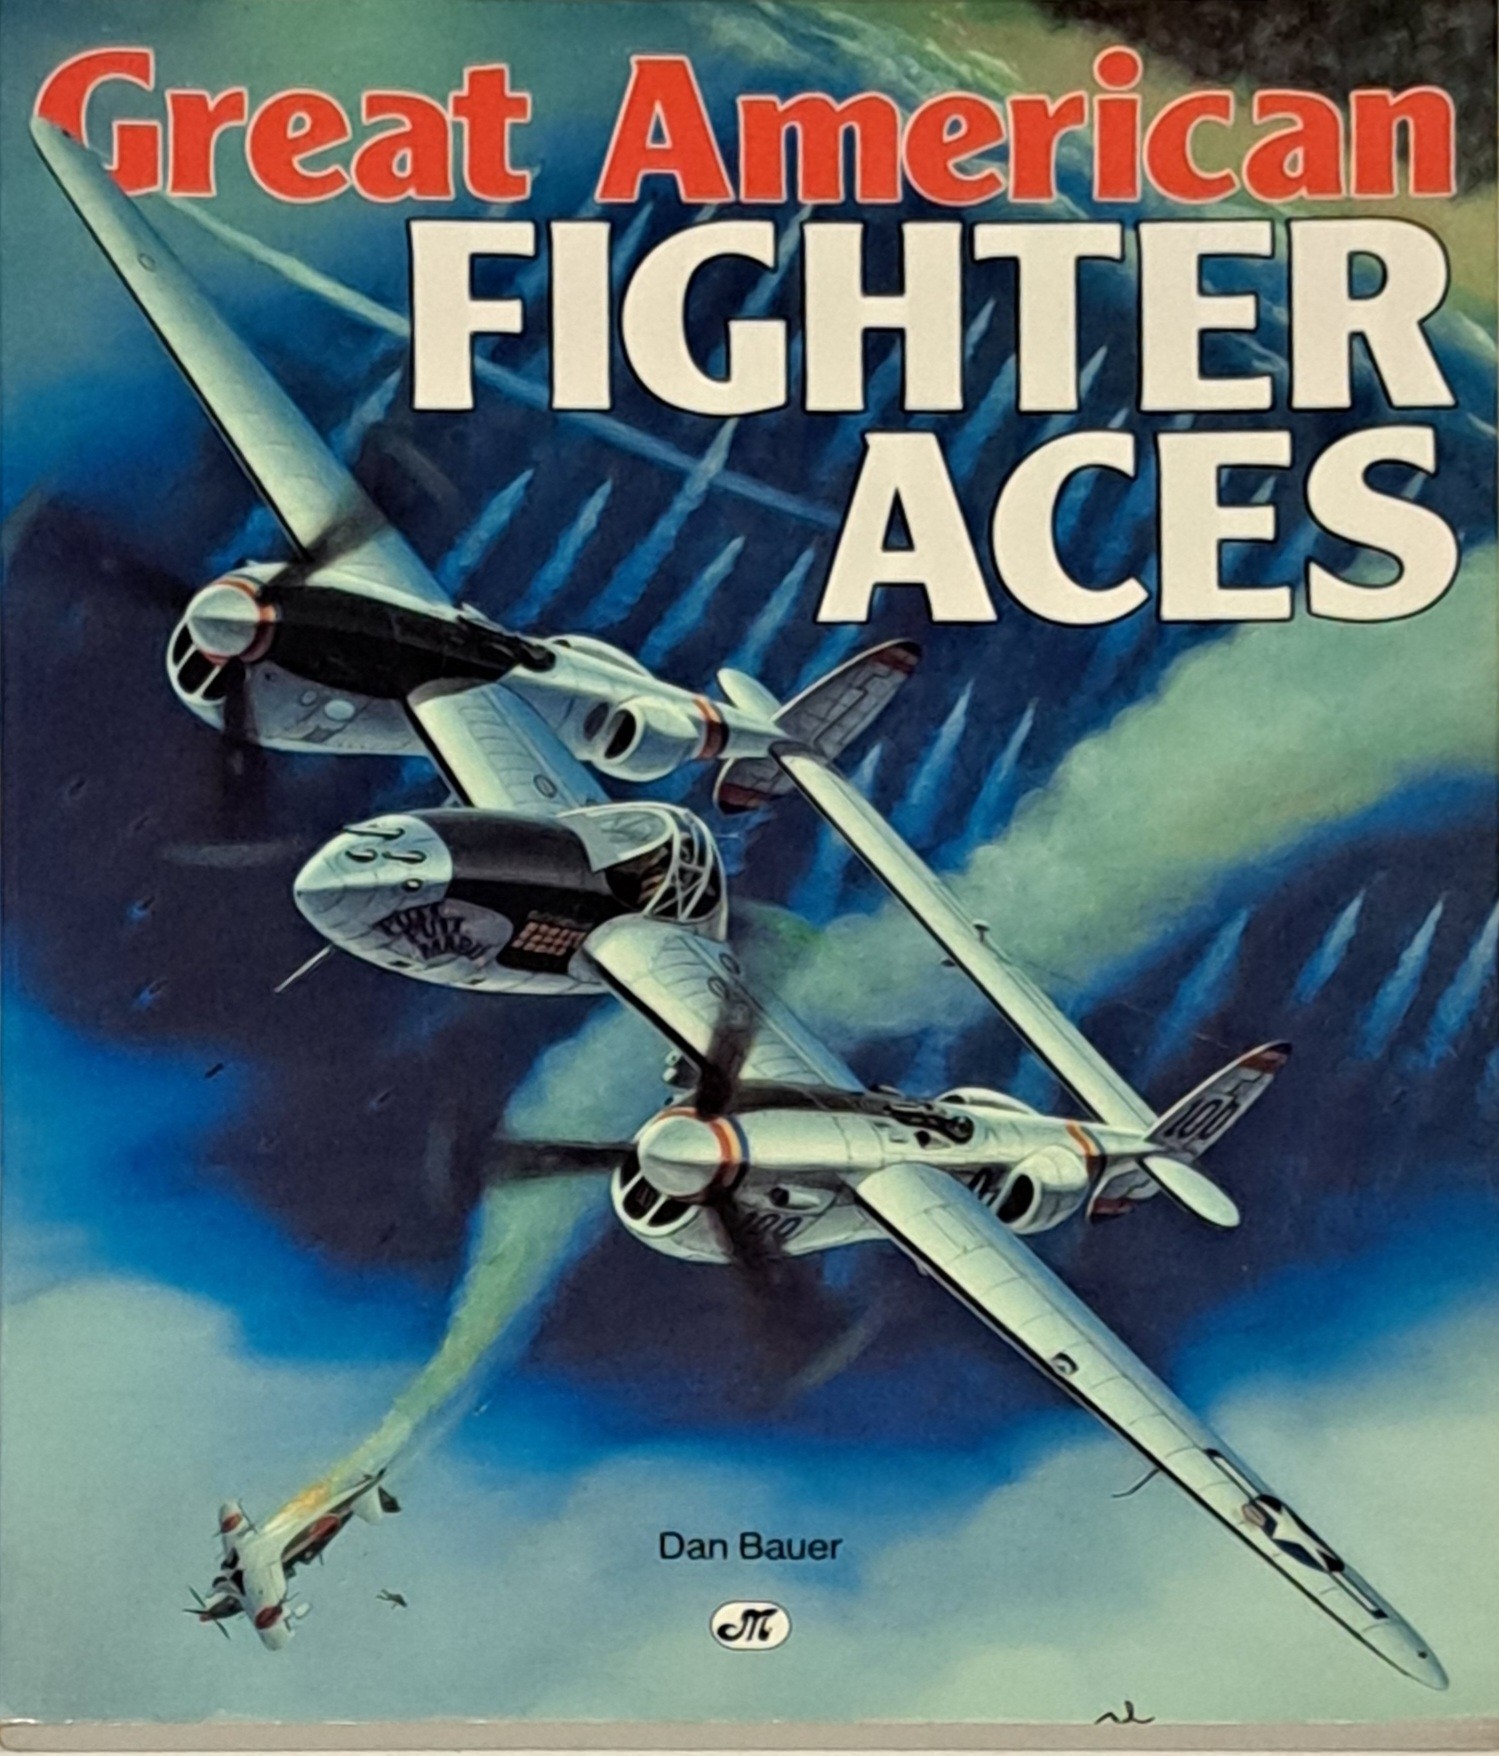 Great American Fighter Aces